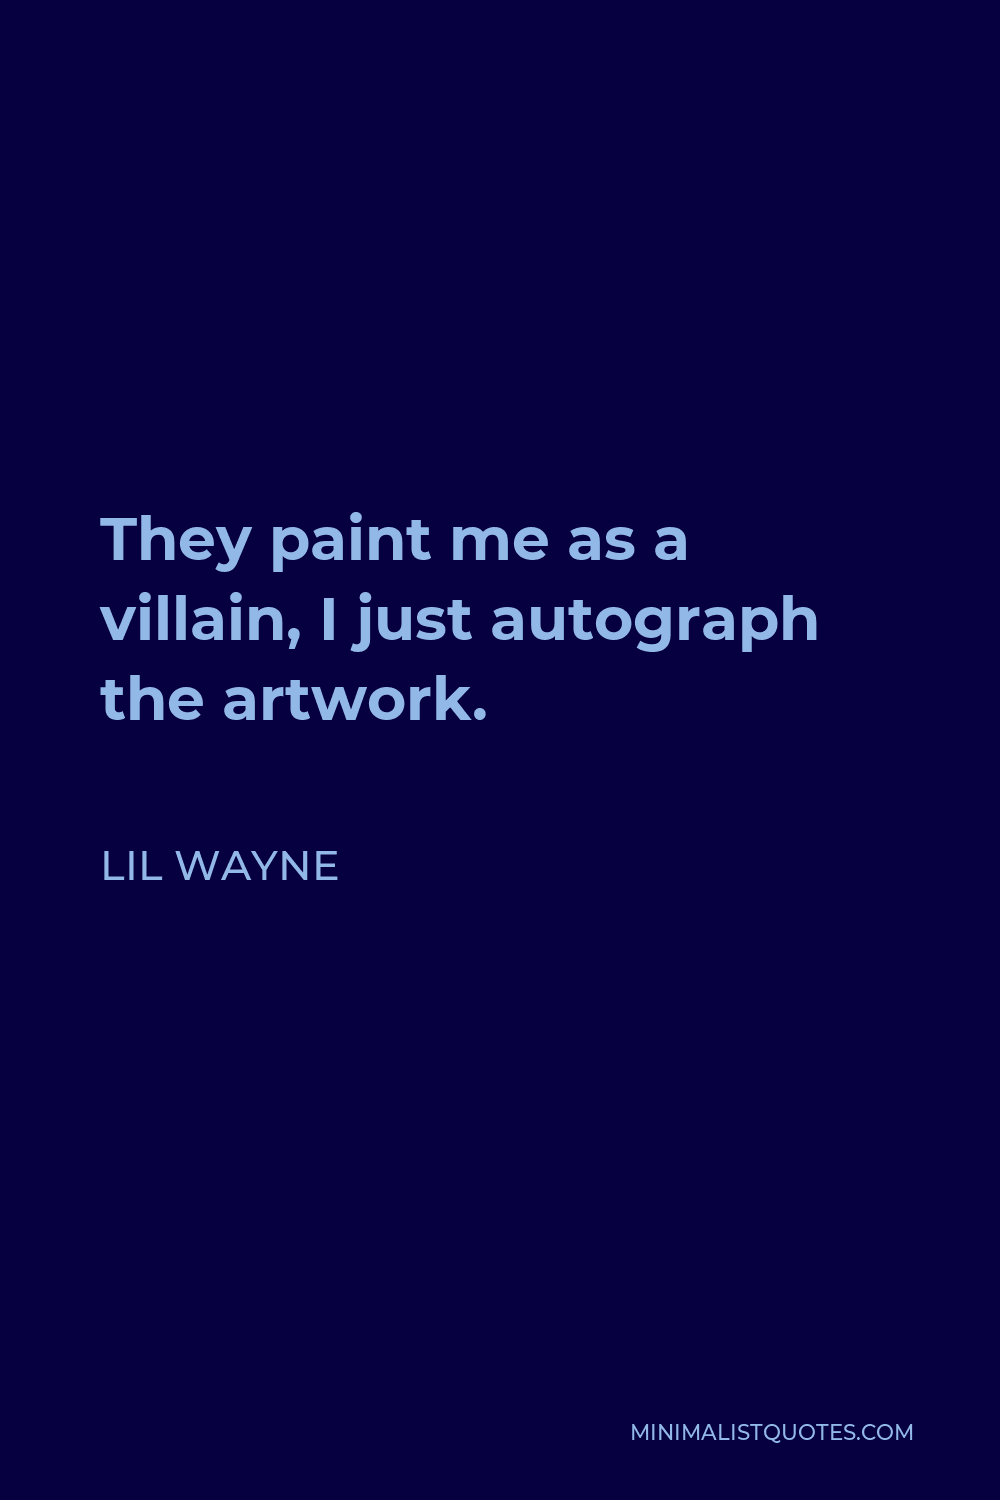 Lil Wayne Quote - They paint me as a villain, I just autograph the artwork.